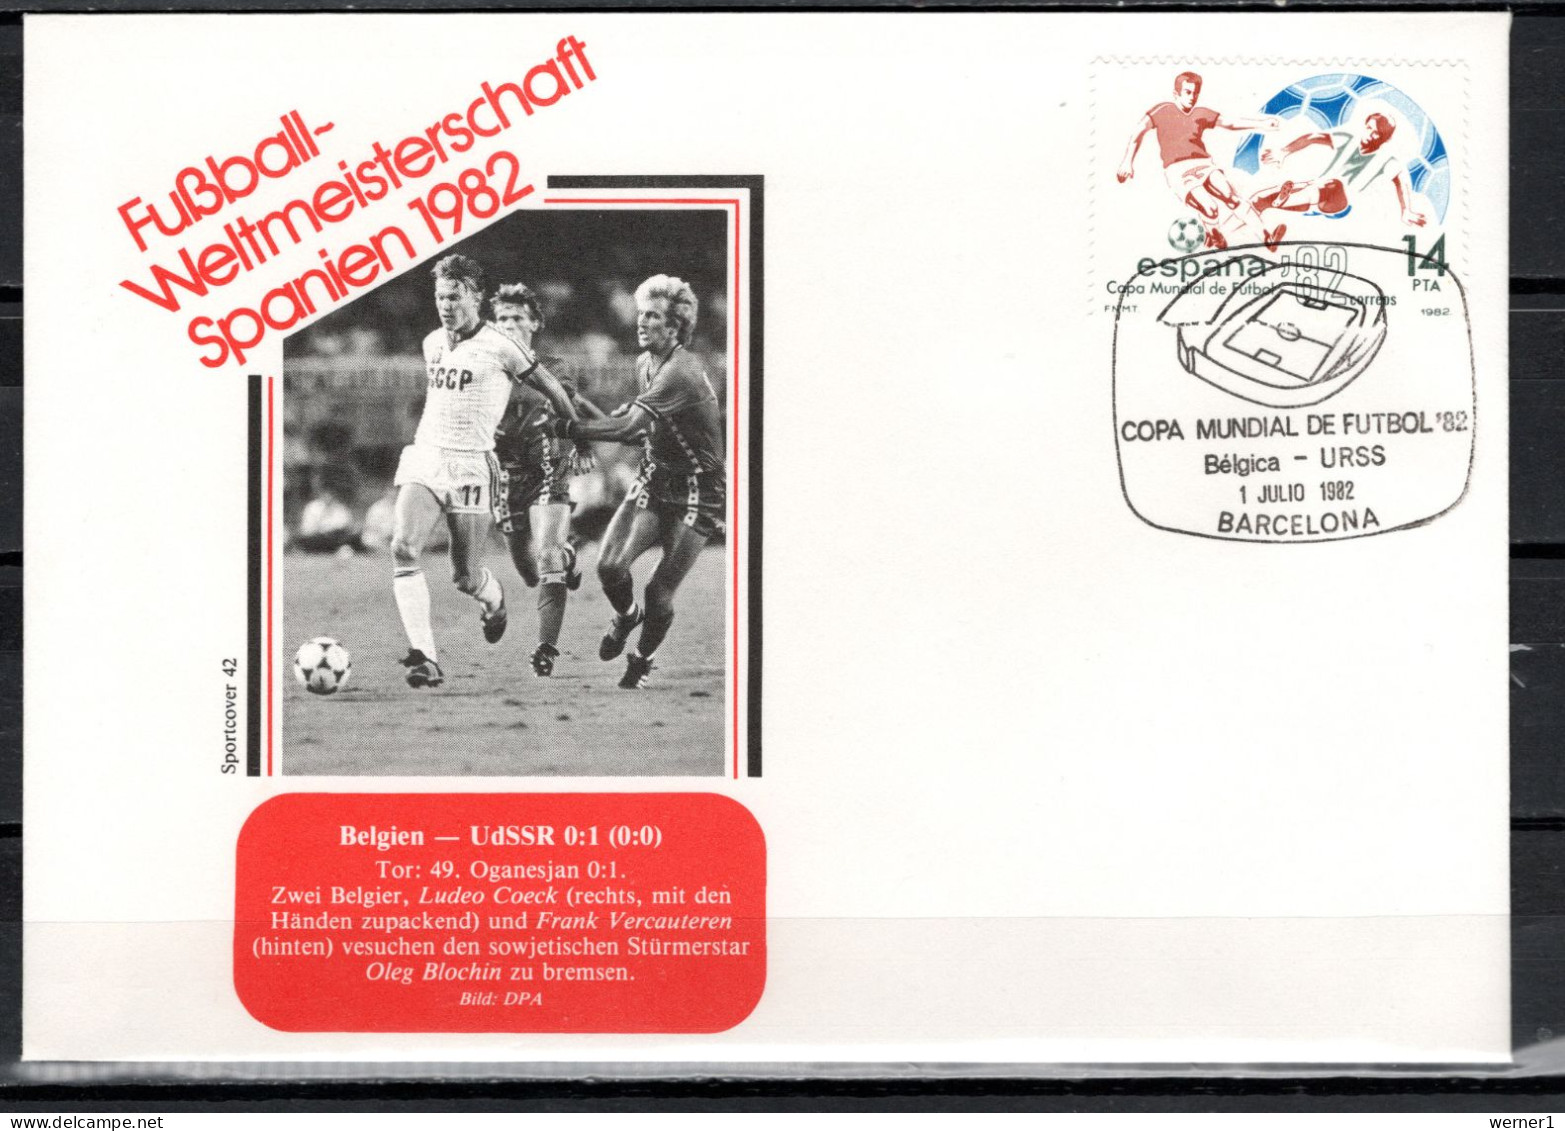 Spain 1982 Football Soccer World Cup Commemorative Cover Match Belgium - USSR 0:1 - 1982 – Spain